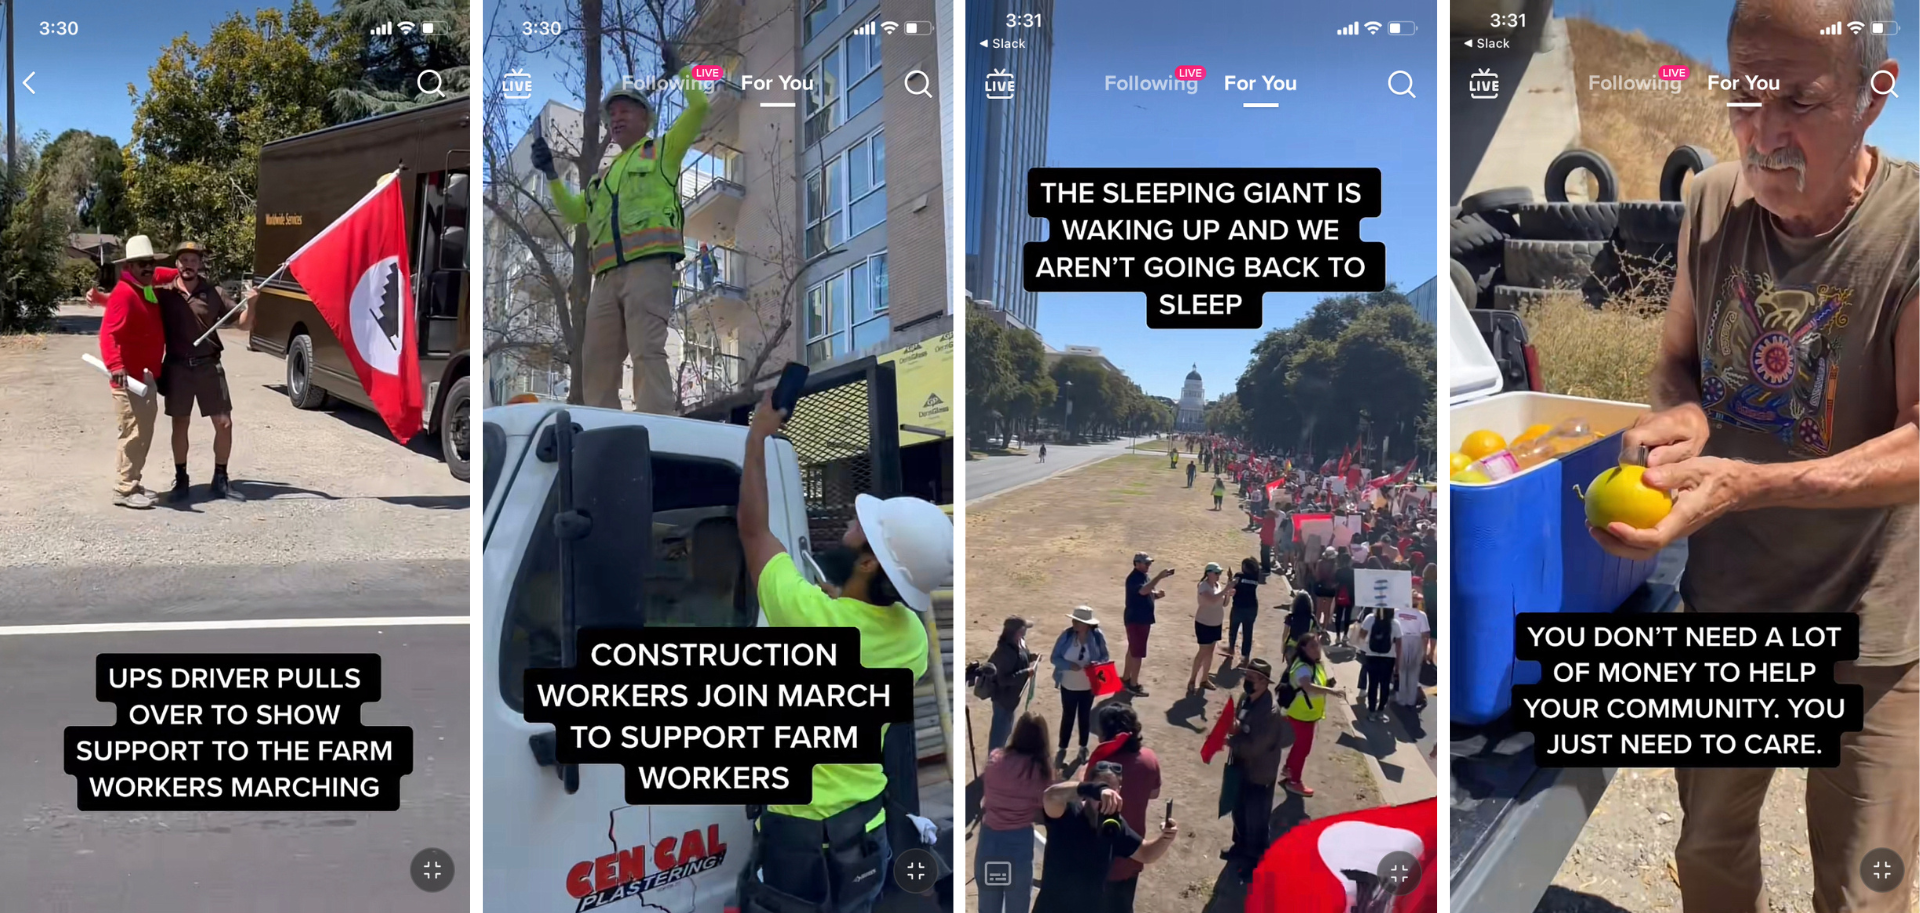 Four screenshots of TikTok videos. The first is a member of the march posing with a uniformed UPS worker holding a United Farm Workers flag. The second is a construction worker standing on top of a truck cheering for the march. The third is a photo of a long line of protesters with the California state capitol in the background. The fourth is an older man handing out sliced oranges to marchers from the back of his truck.